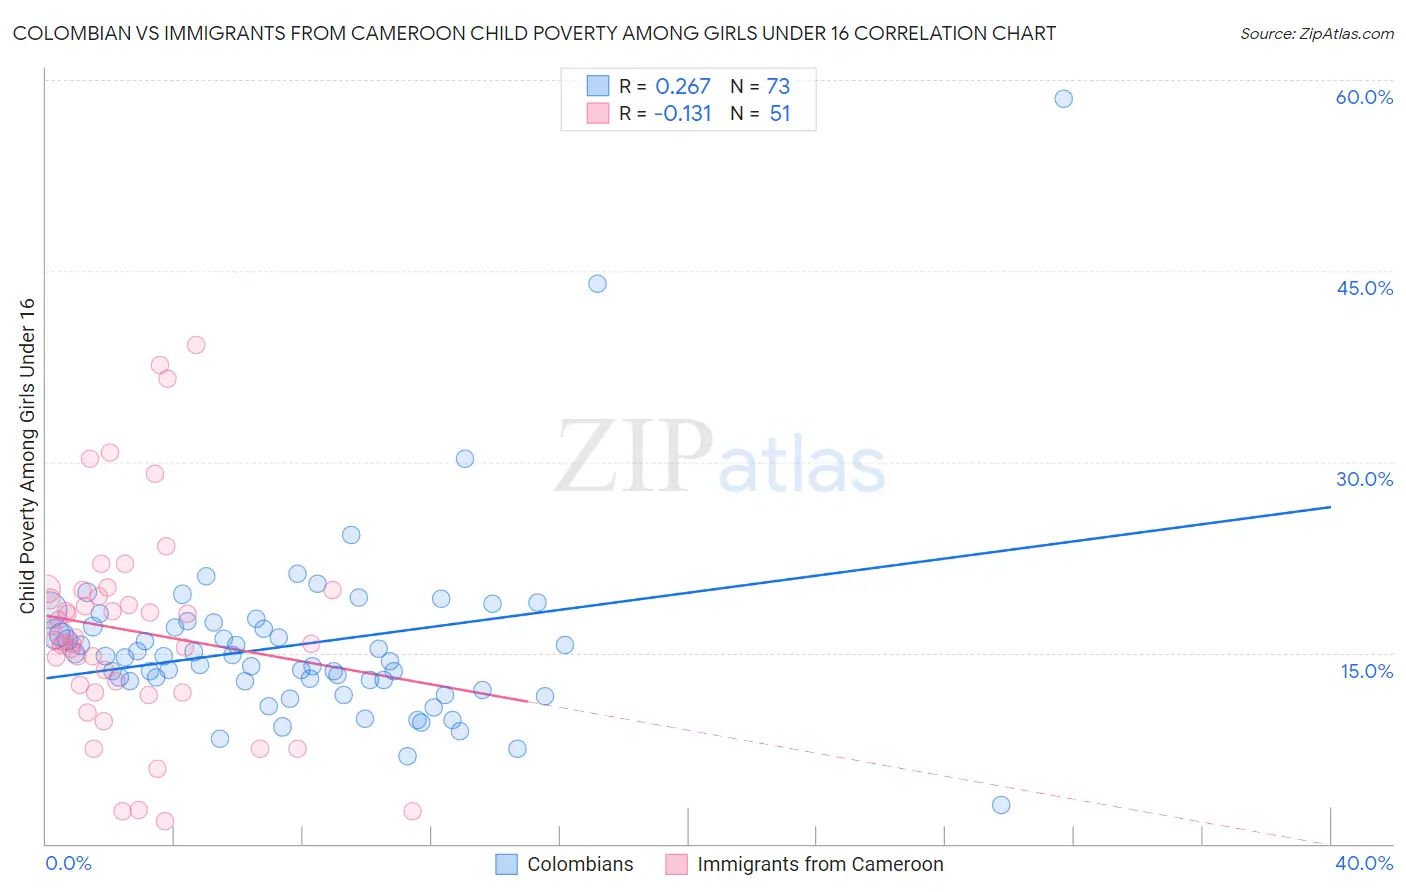 Colombian vs Immigrants from Cameroon Child Poverty Among Girls Under 16